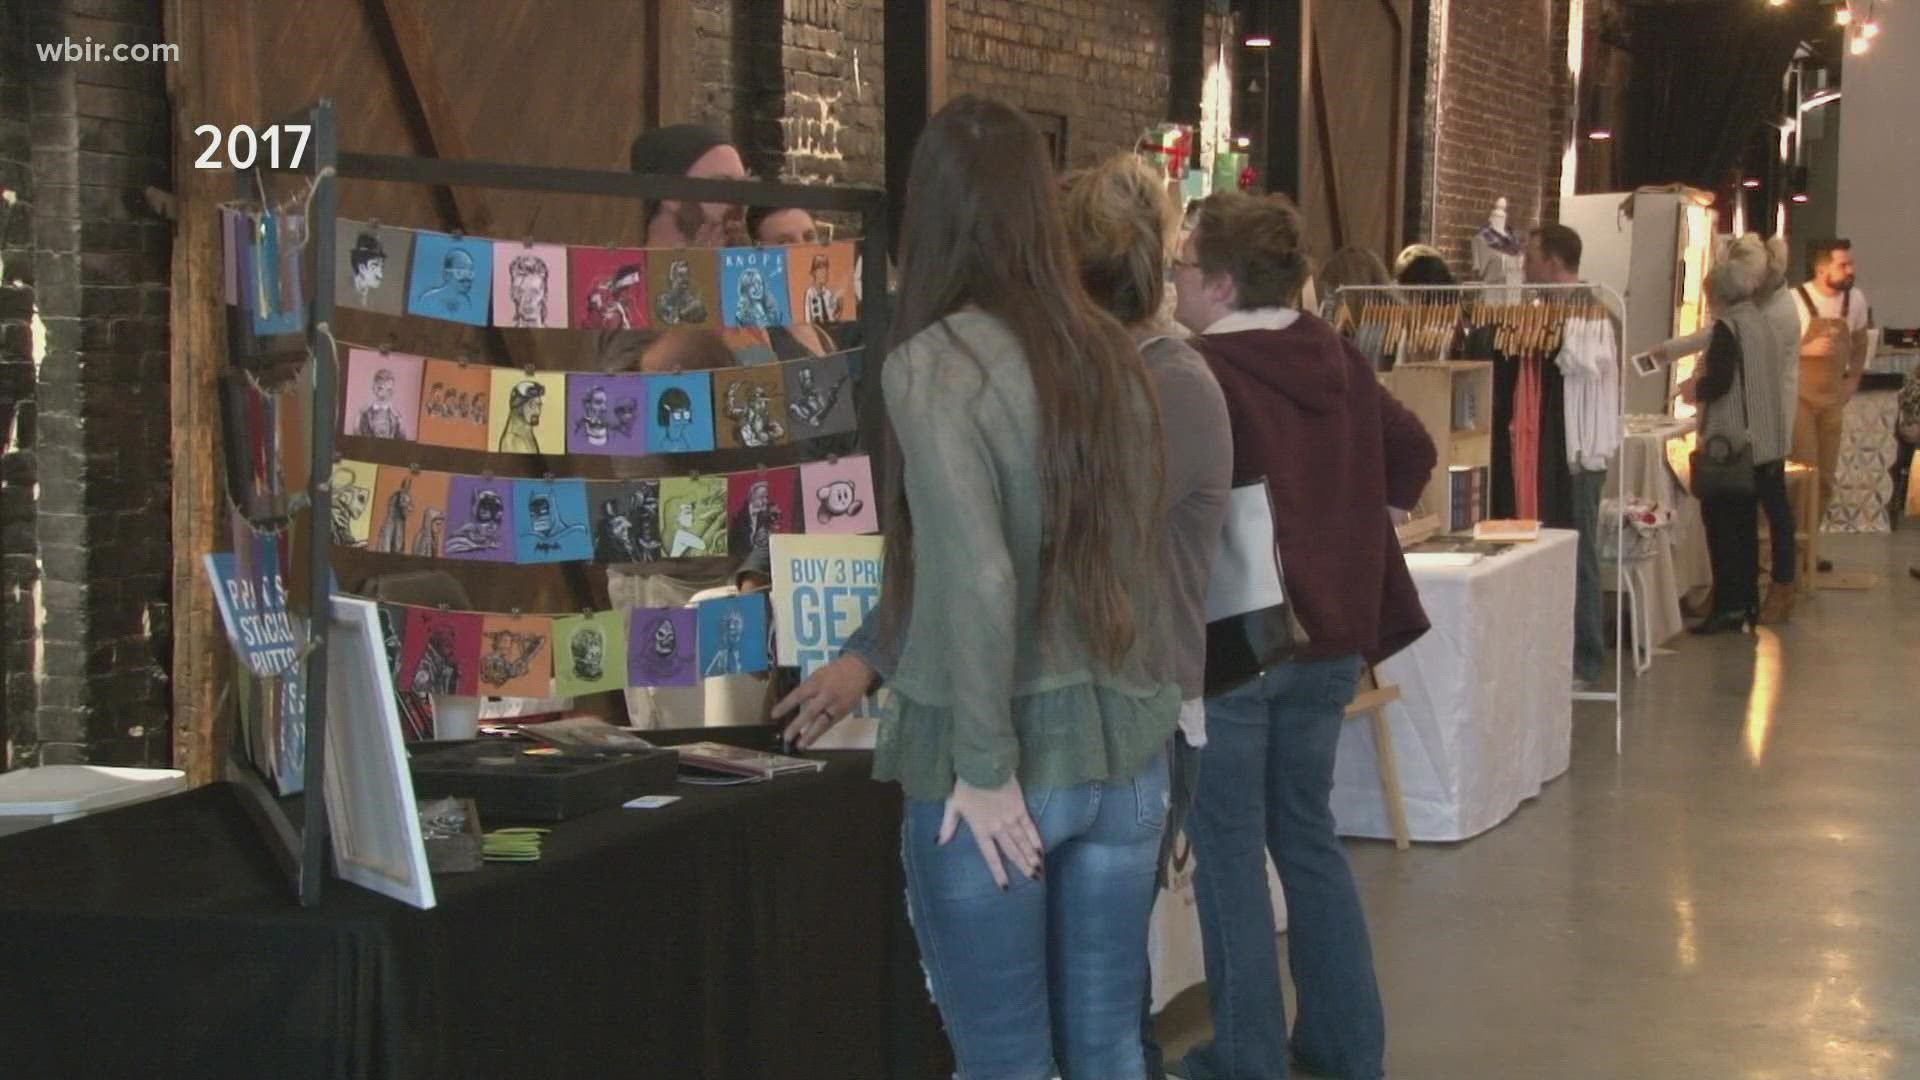 Officials said vendors at the fair are chosen after a juried event and are then curated based on their products, creativity and "retropolitan swagger."